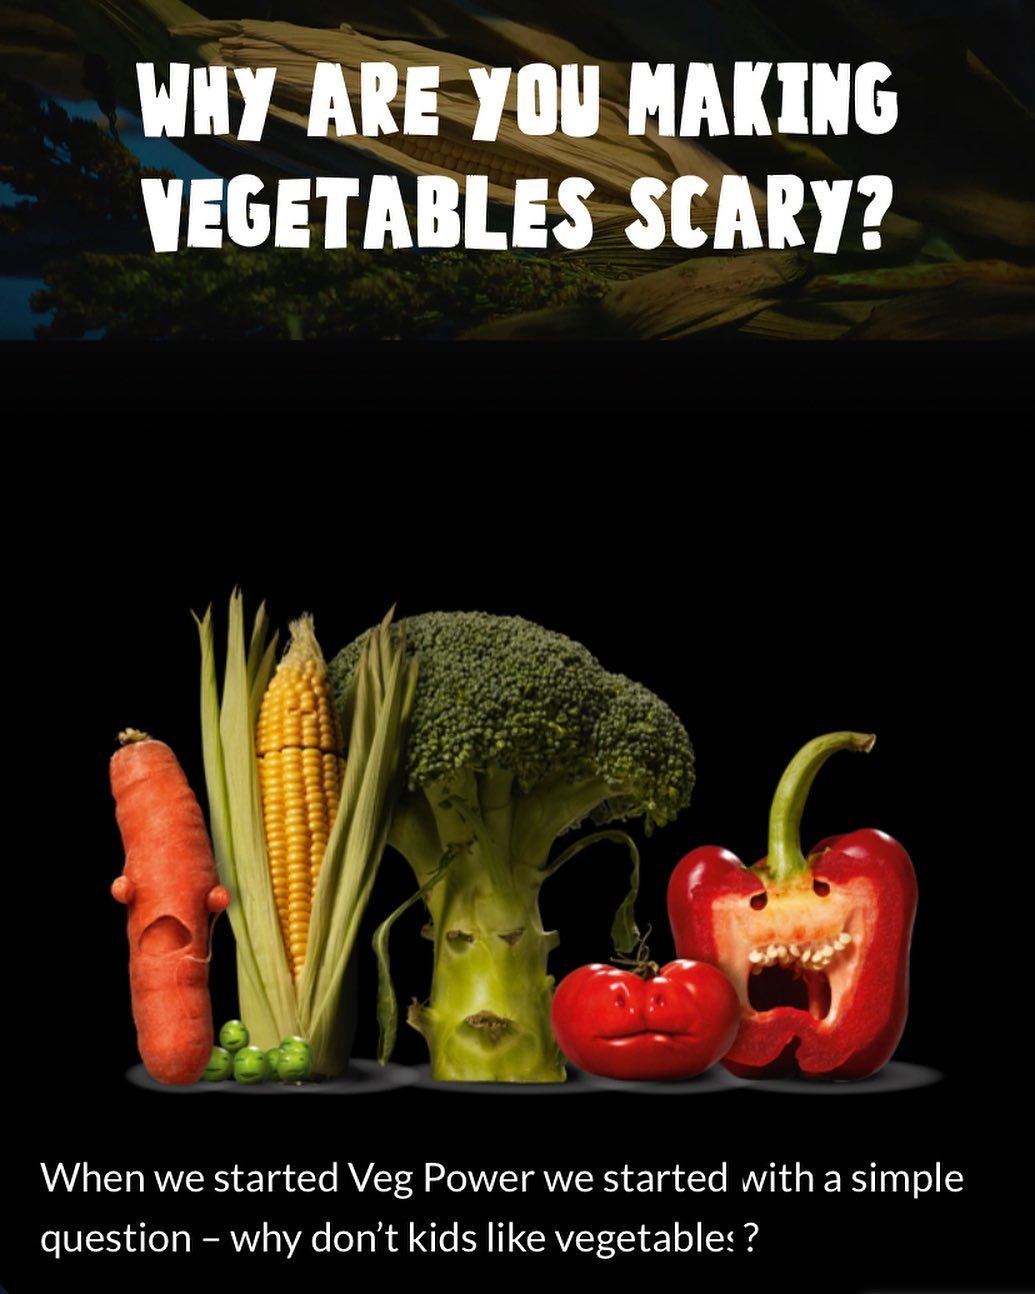 I am very interested in this campaign to encourage behaviour change in children around eating more veg. The theme is evil vegetables are trying to take over the world and the only way to stop them is to eat them. 

What are your initial impressions? 